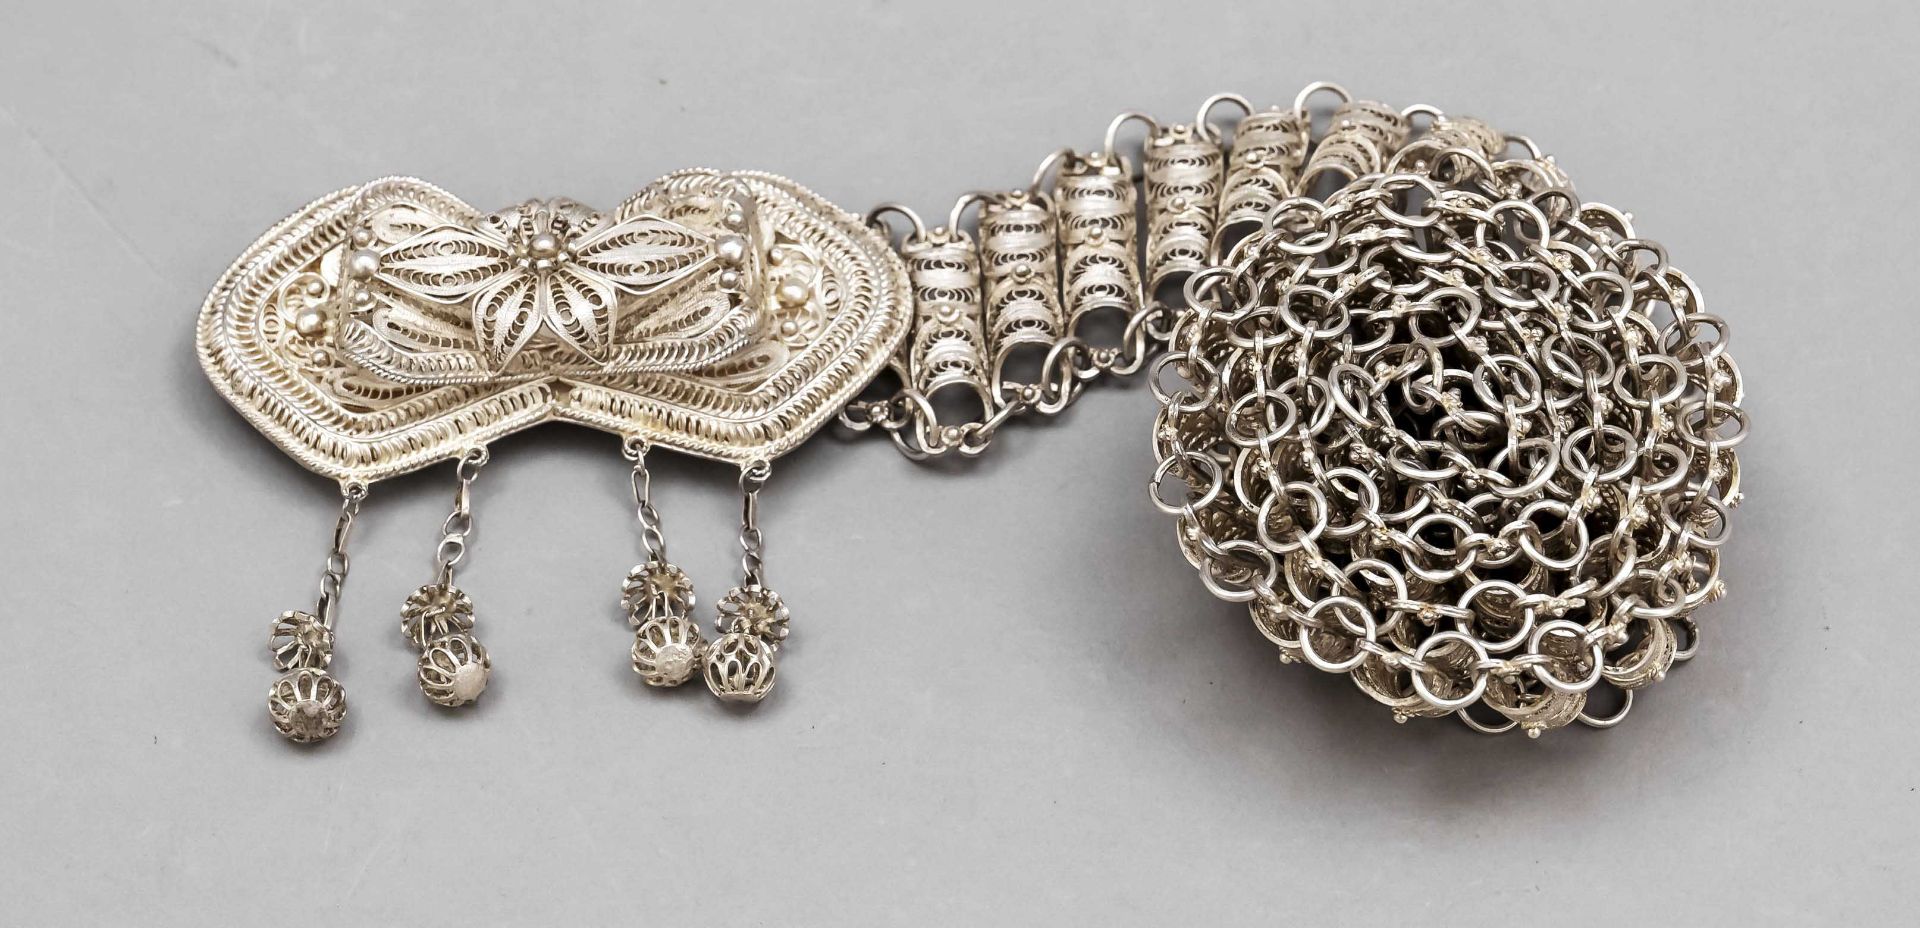 Wedding belt, 20th century, sterling silver 925/000, filigree work, consisting of numerous links, l.